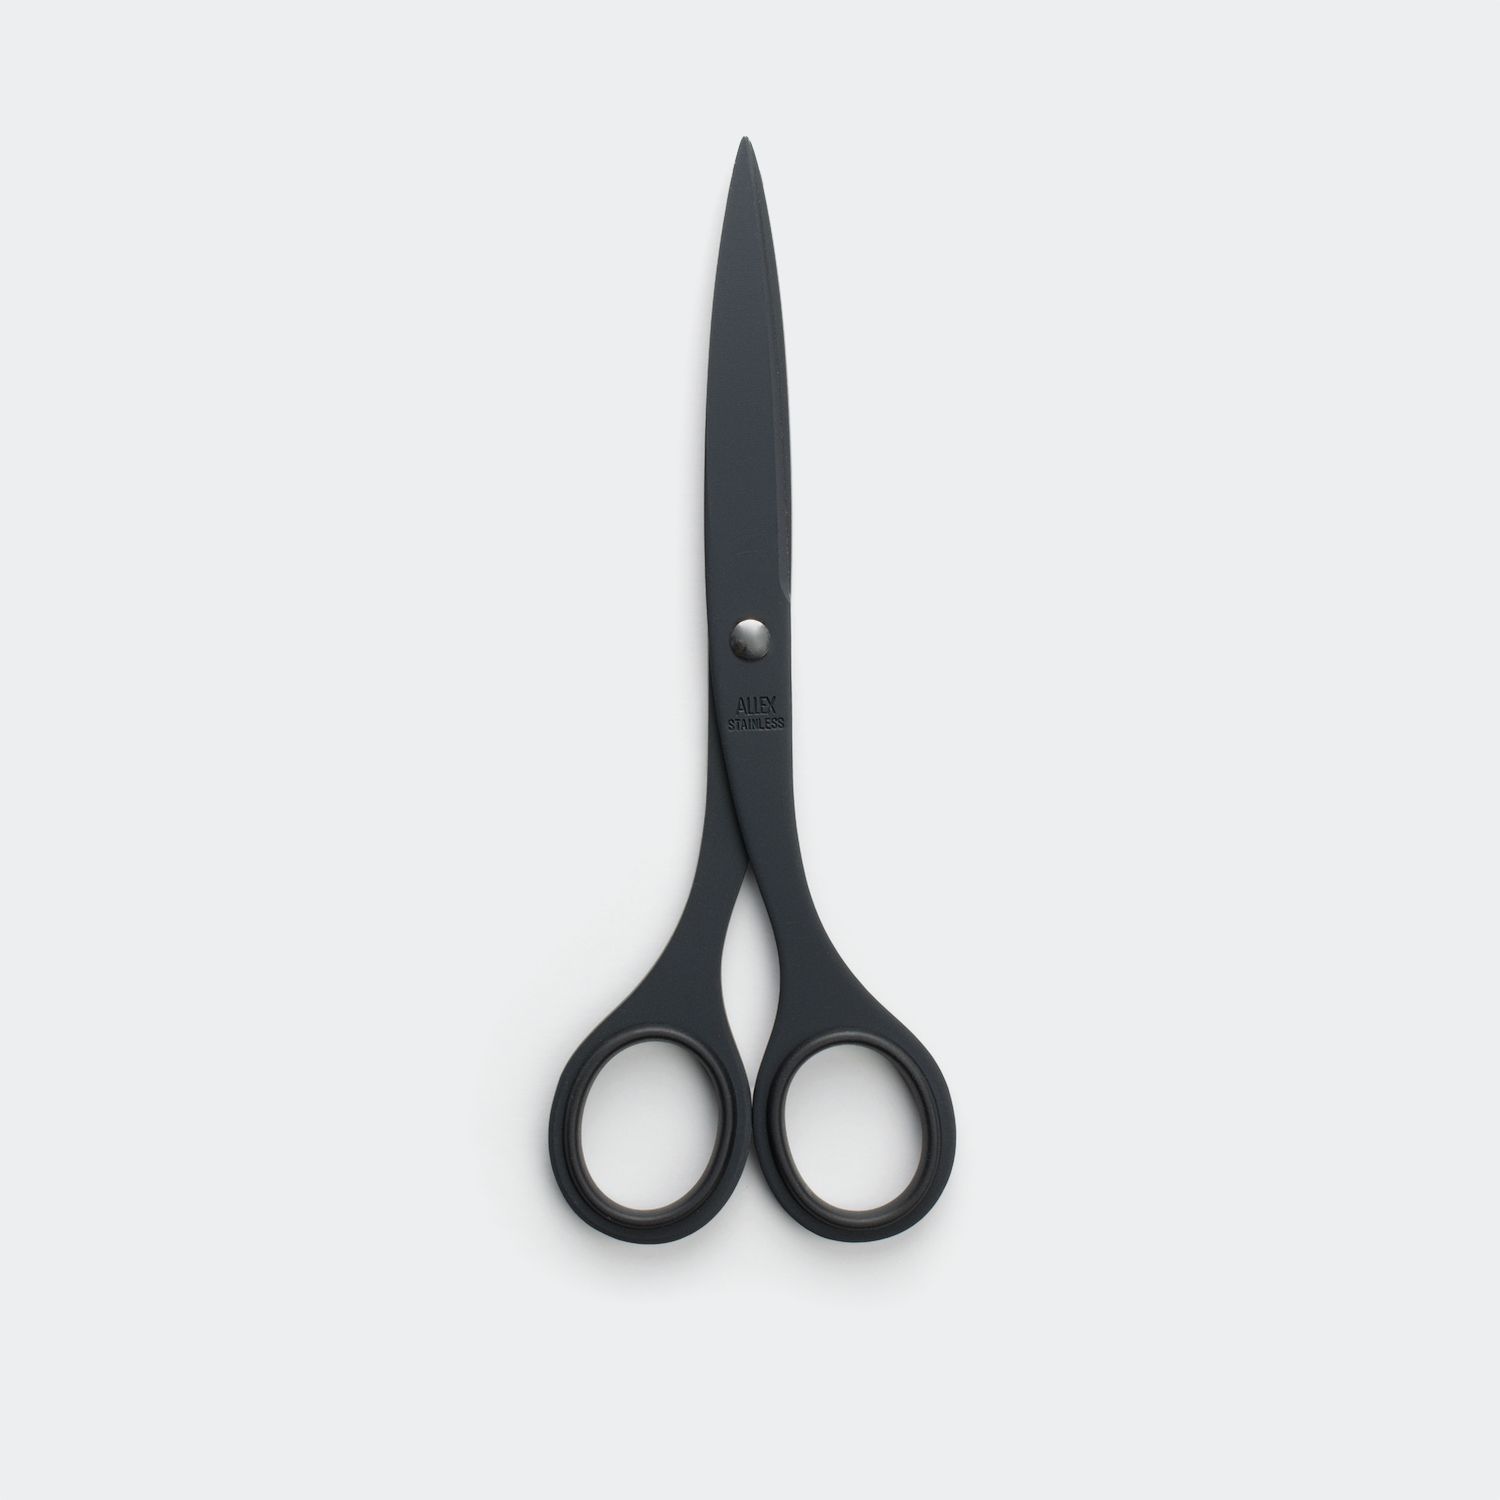  ALLEX Japanese Office Scissors for Desk, Small 5.3 All Purpose  Scissors, Made in JAPAN, All Metal Sharp Japanese Stainless Steel Blade  with Non-Slip Soft Ring, Black : Office Products